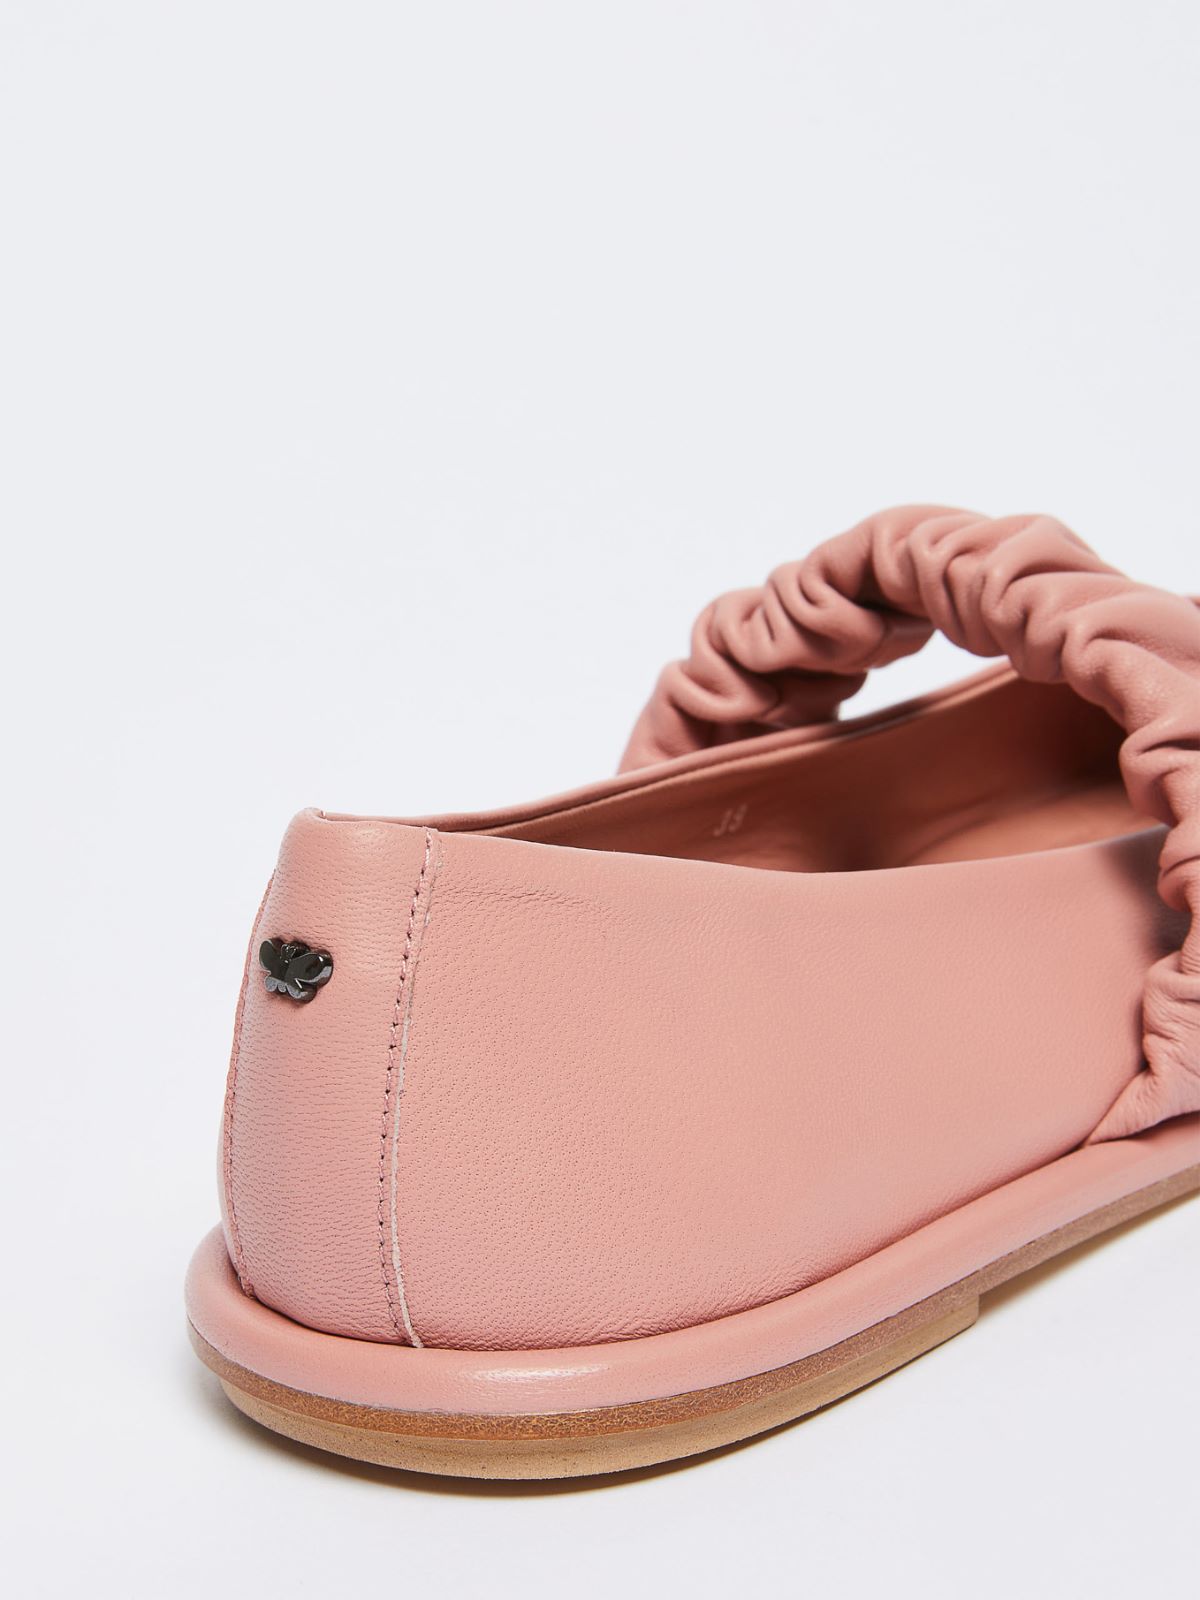 Ballet flats in nappa leather - ANTIQUE ROSE - Weekend Max Mara - 5